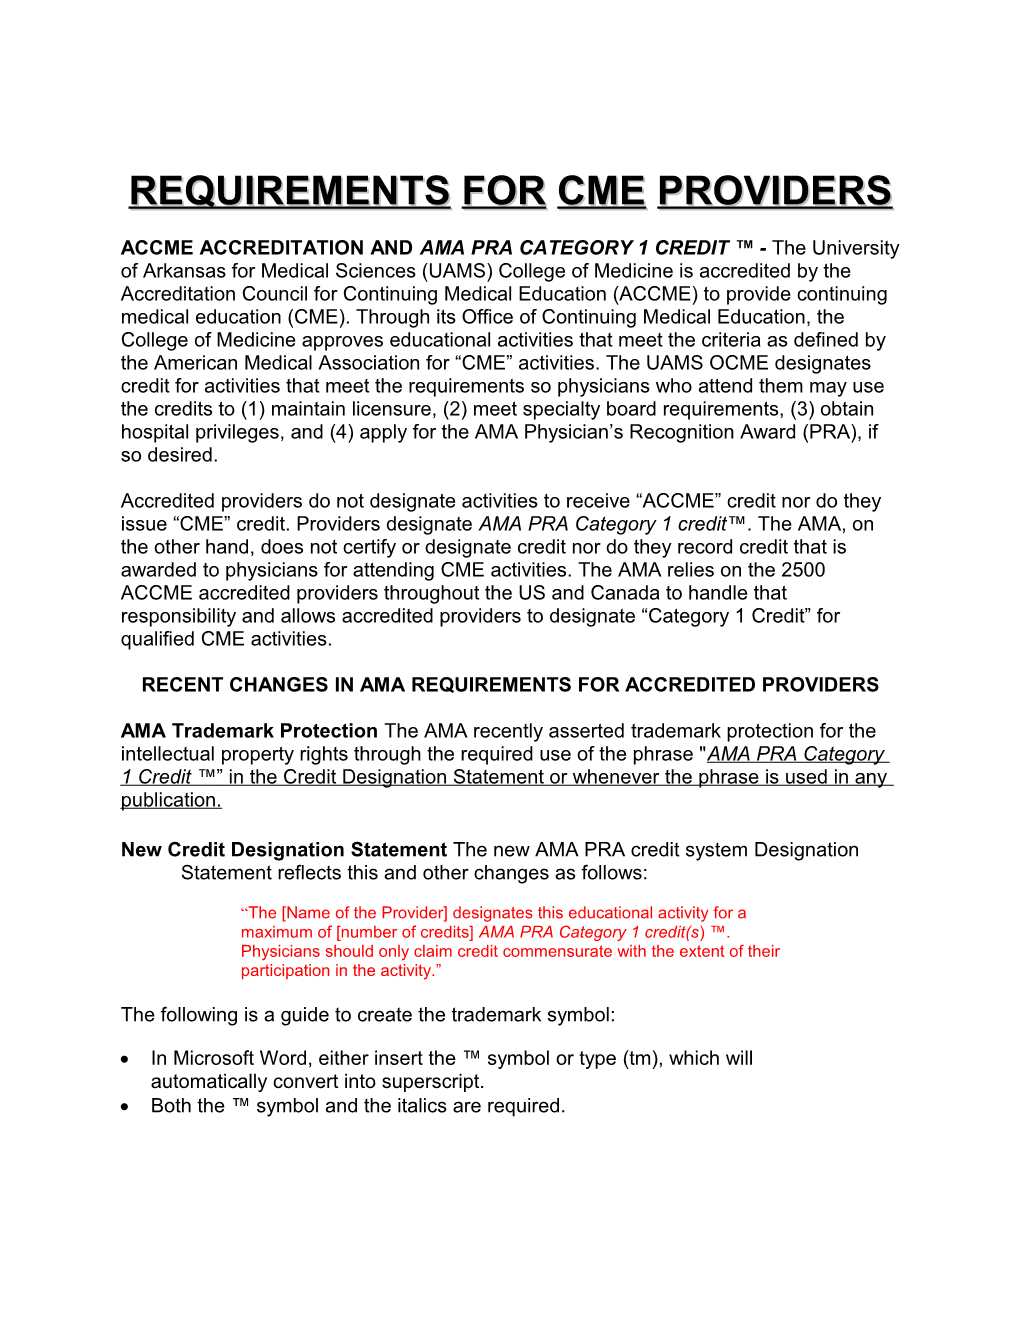 New Requirements for Cme Providers